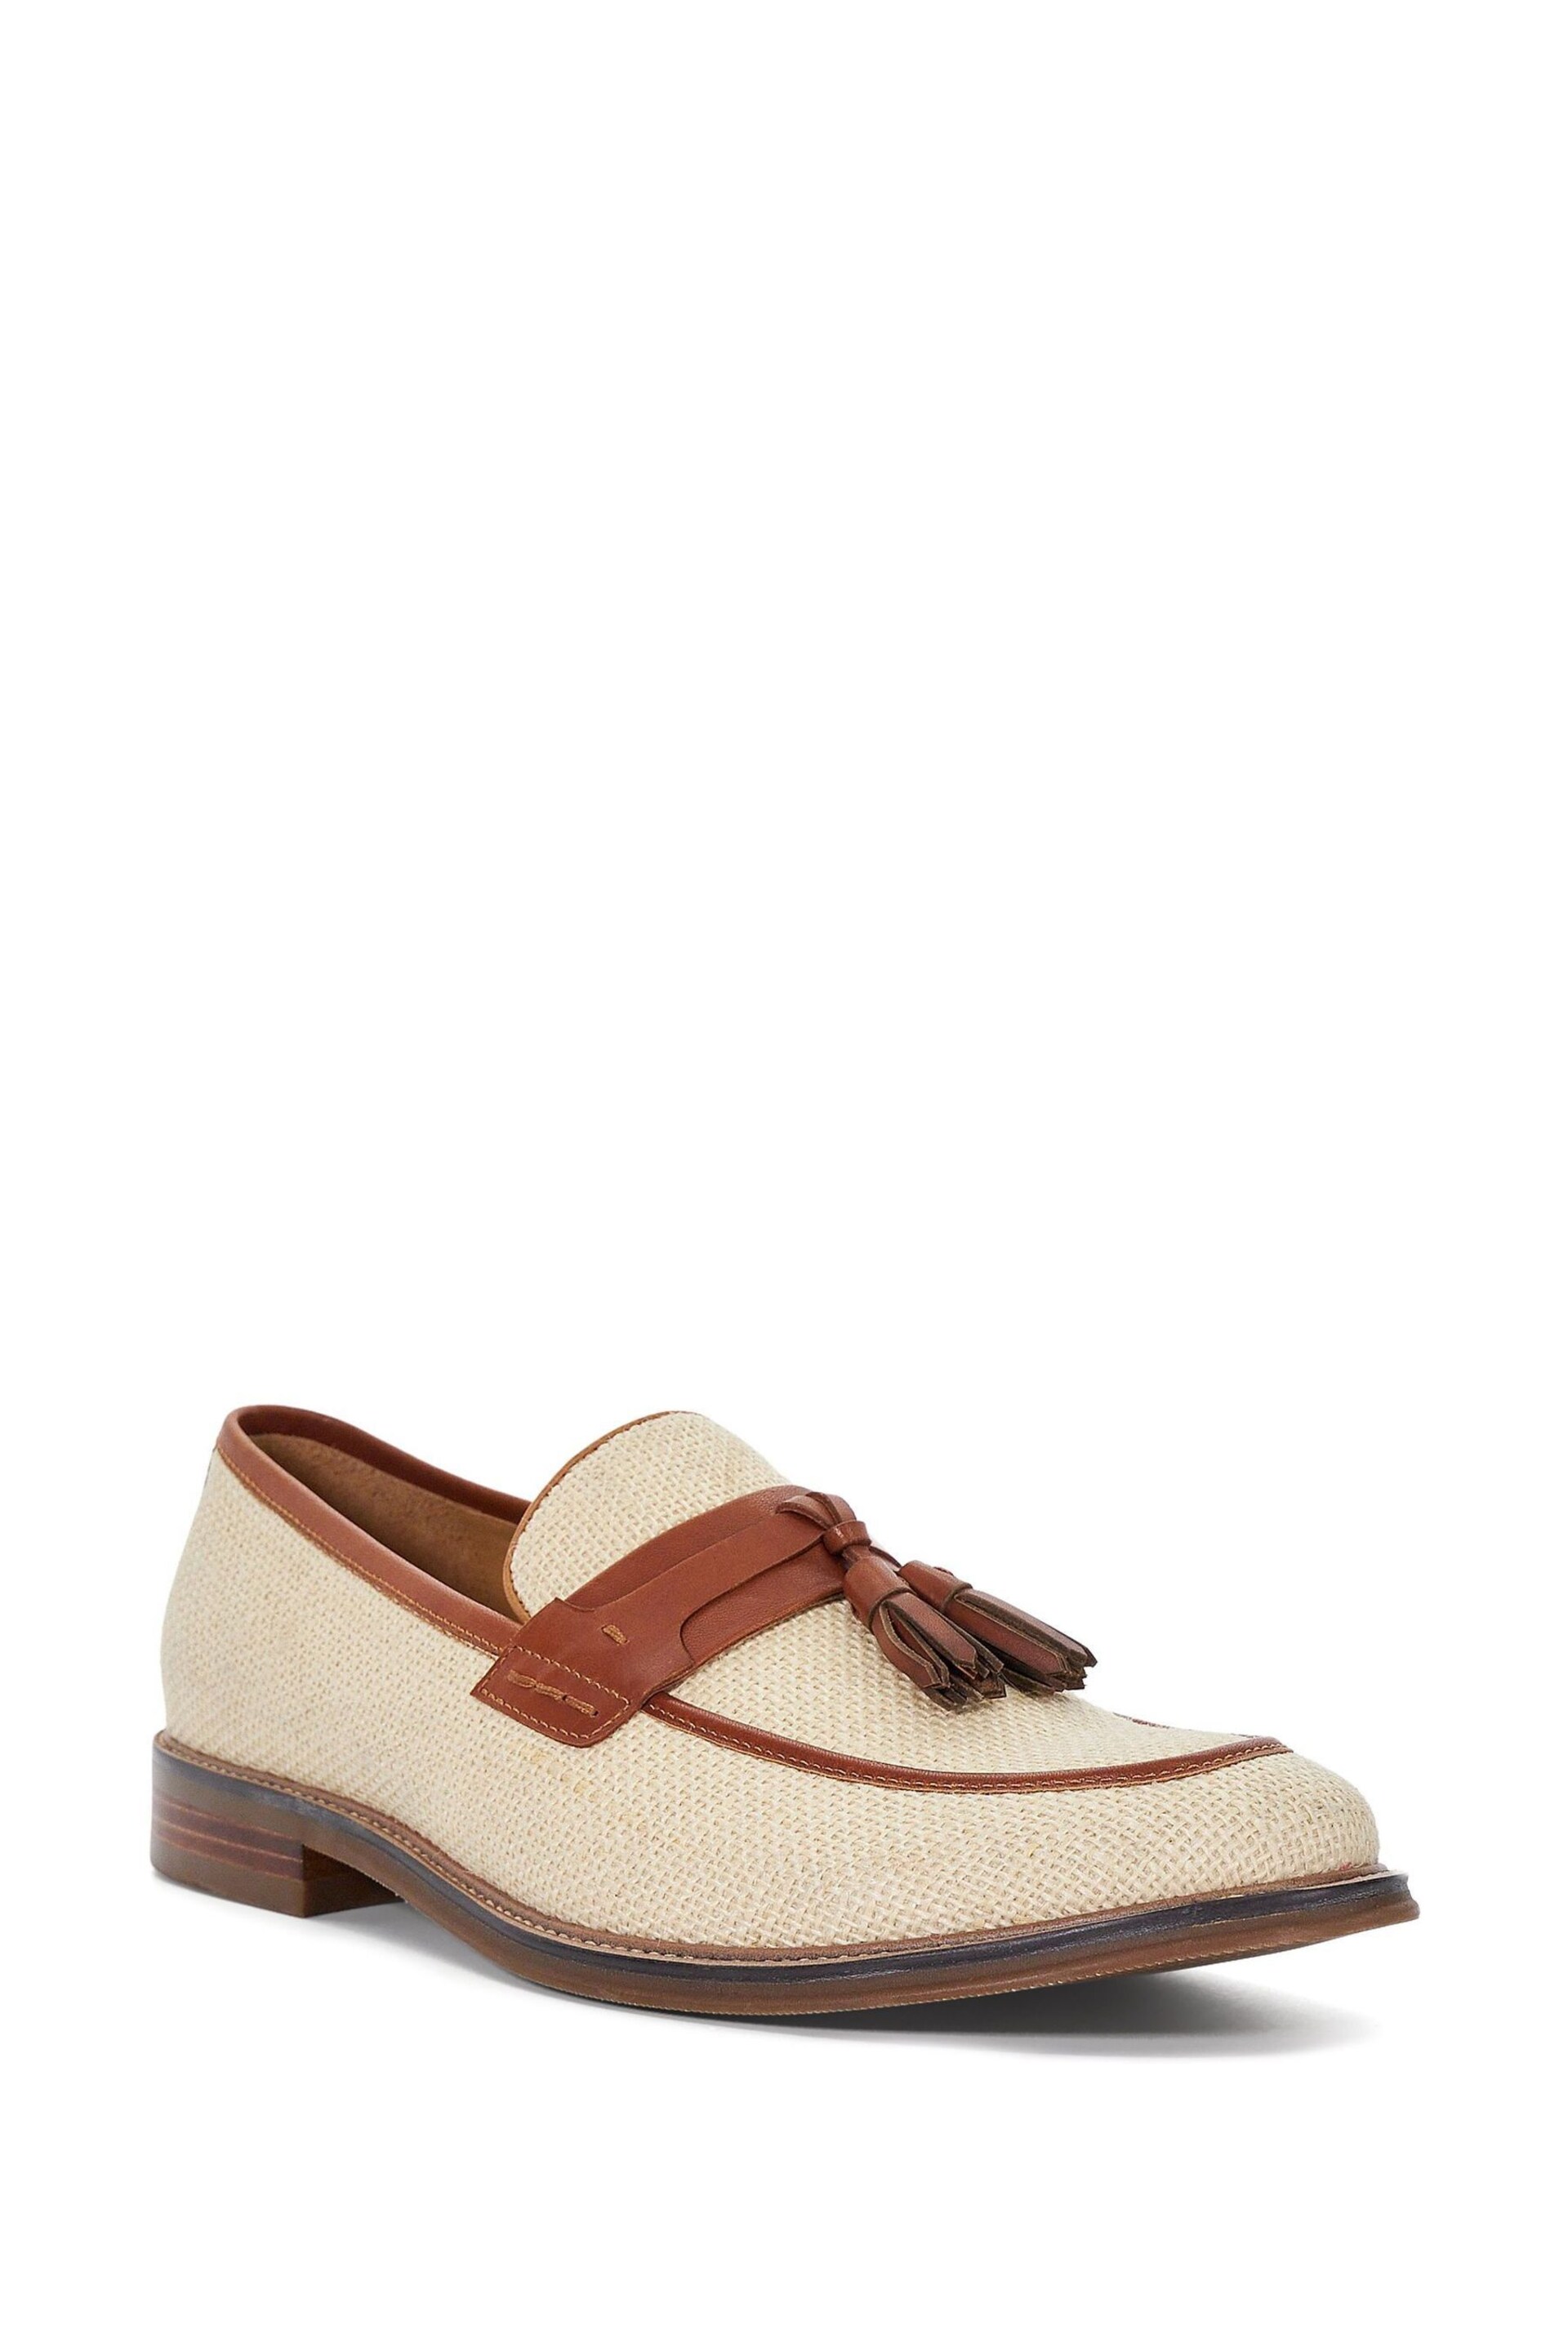 Dune London Brown Sought Mixed Material Loafers - Image 3 of 6